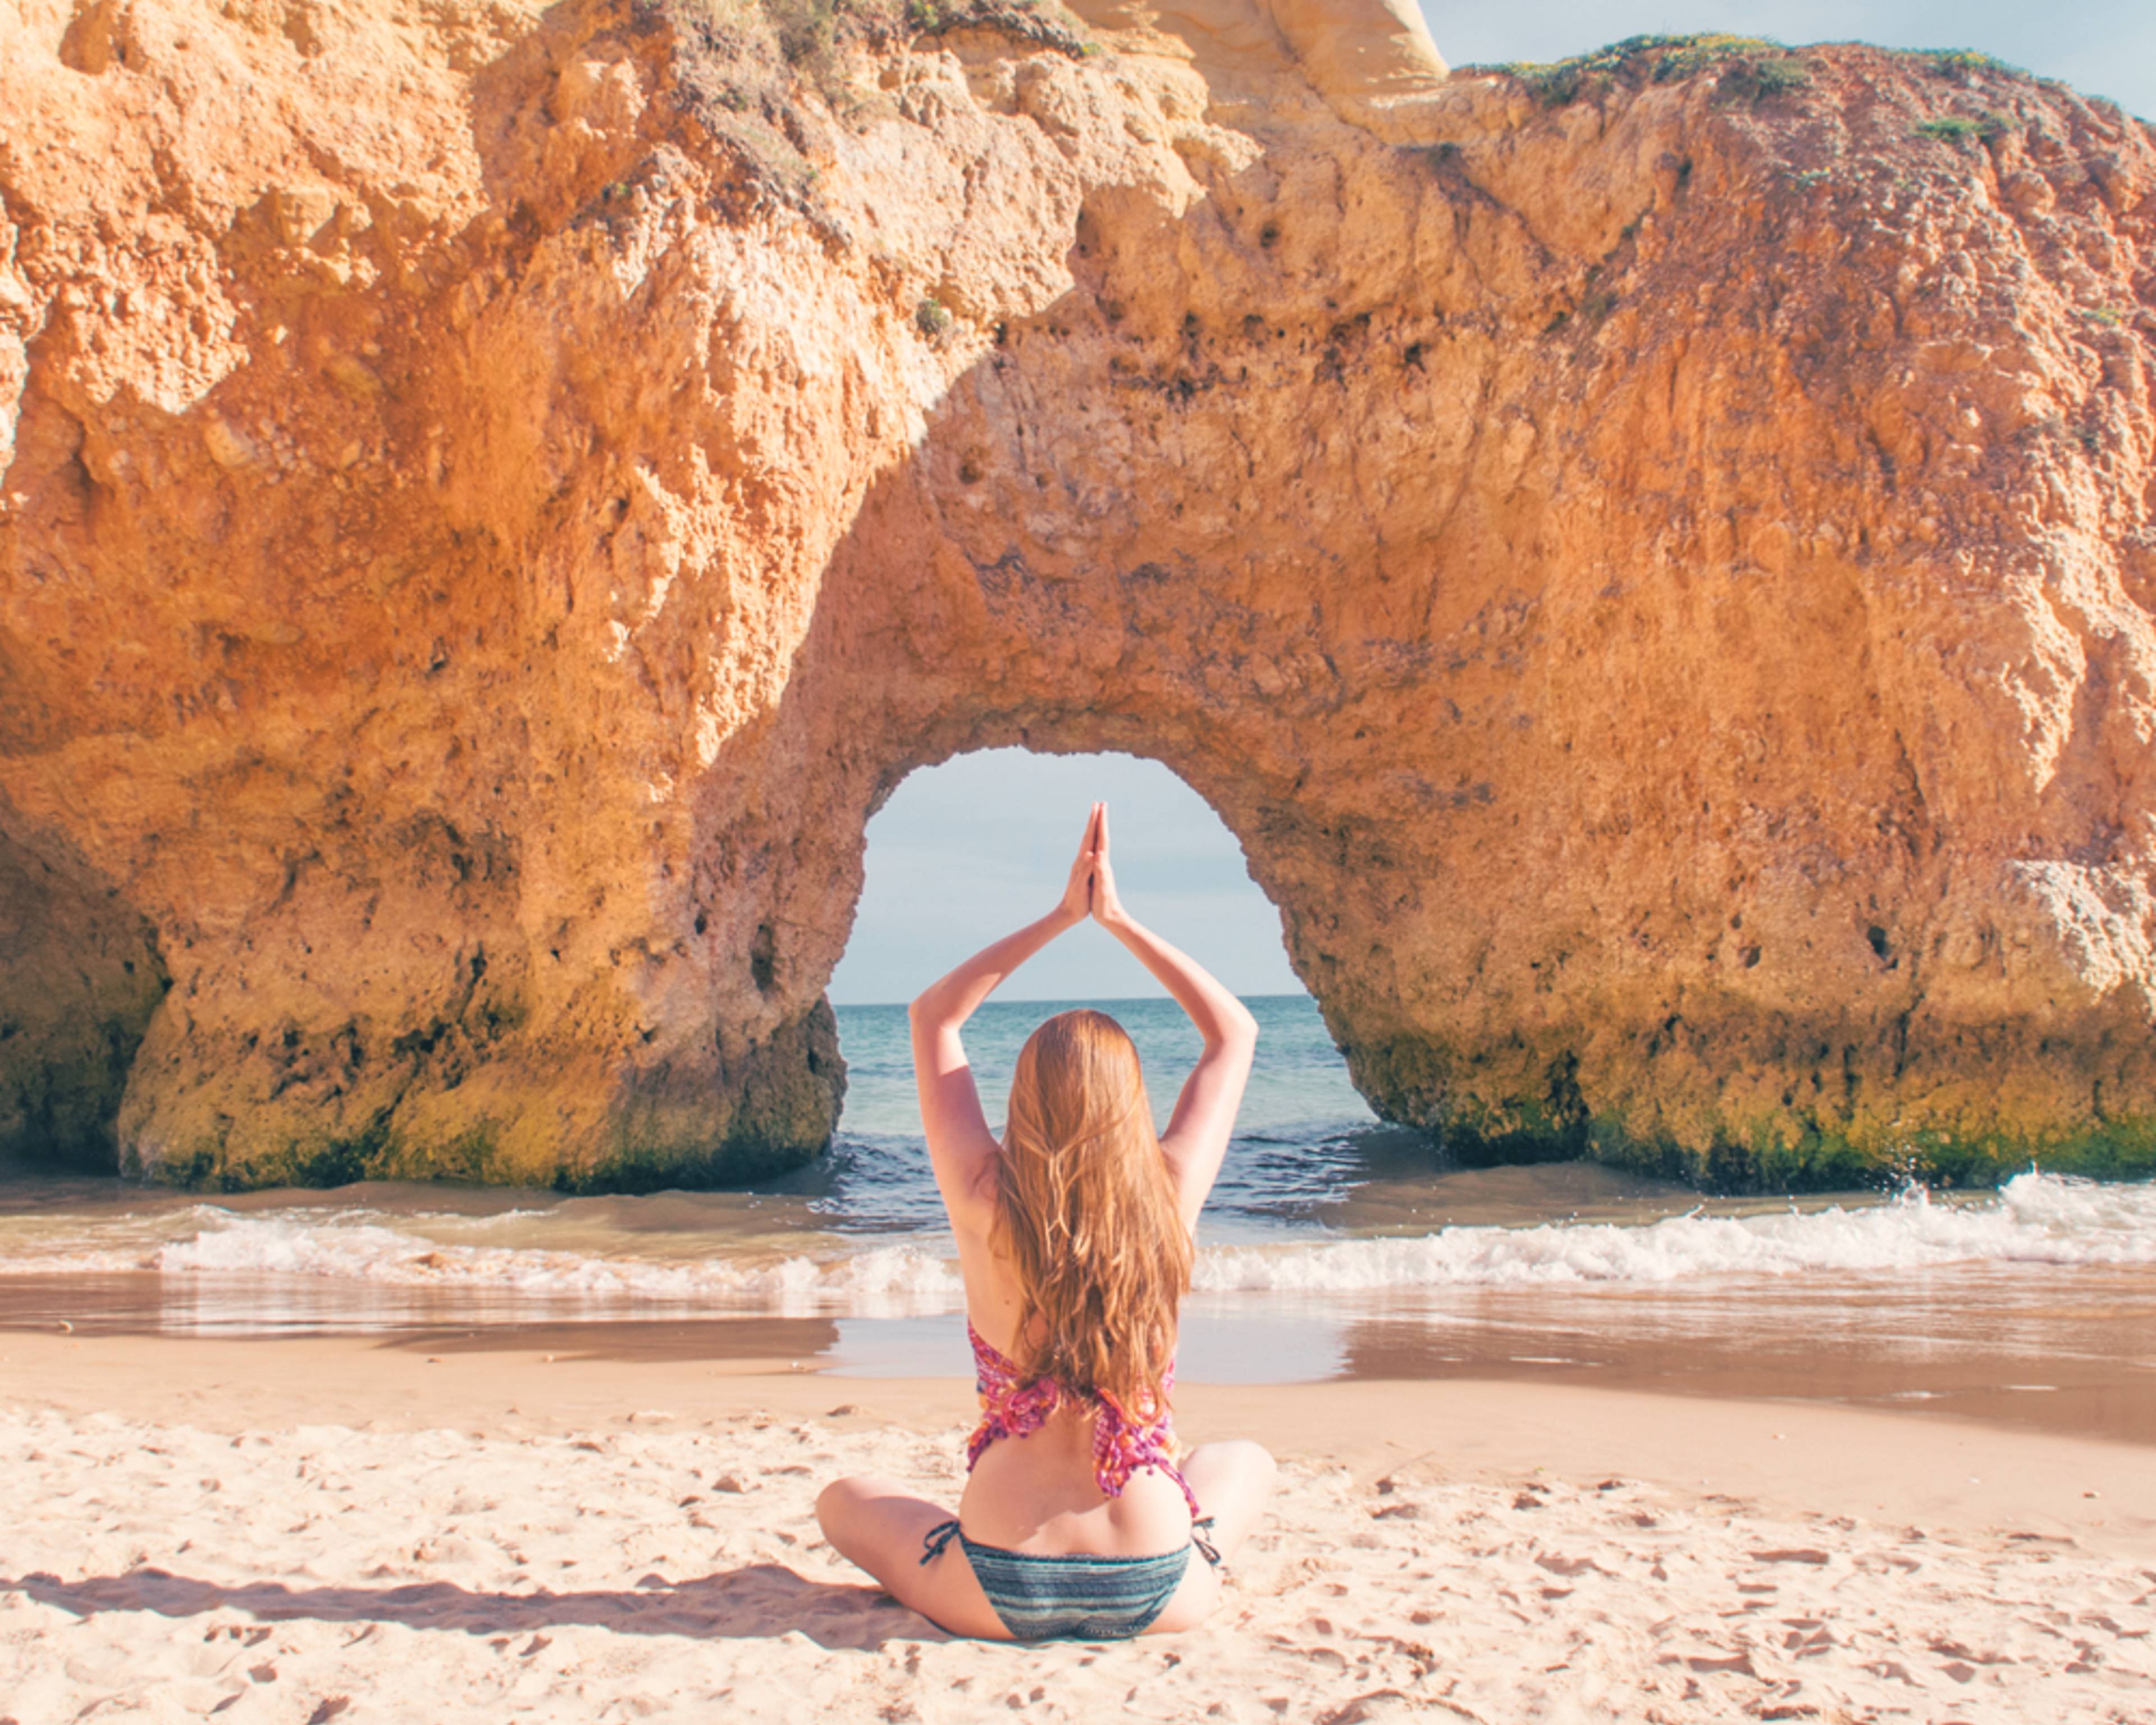 Experience yoga in Portugal with a hand-picked local expert